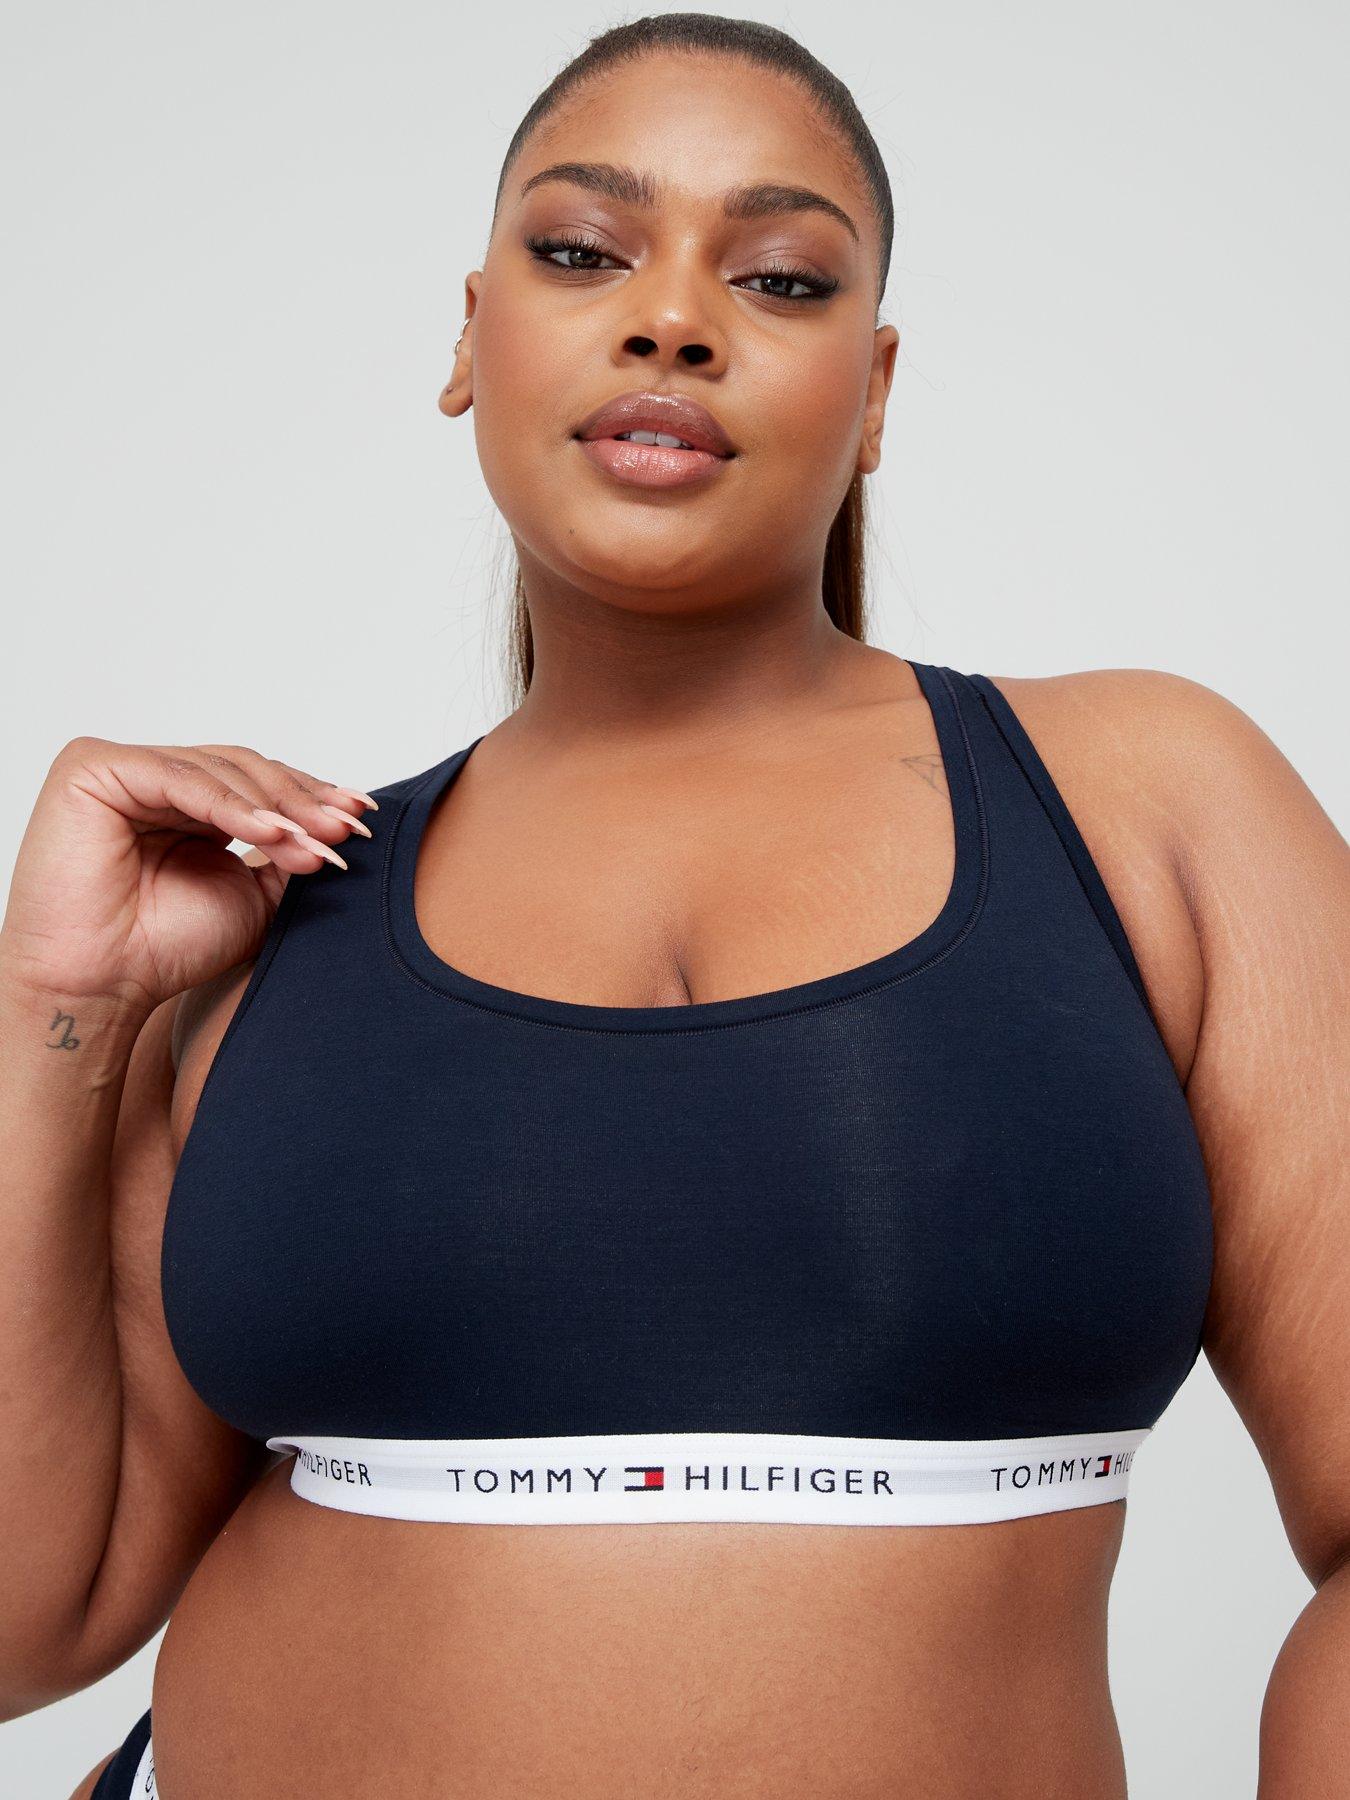 Model is 5'8.5 and wears Plus size 16. With all the stretch of a